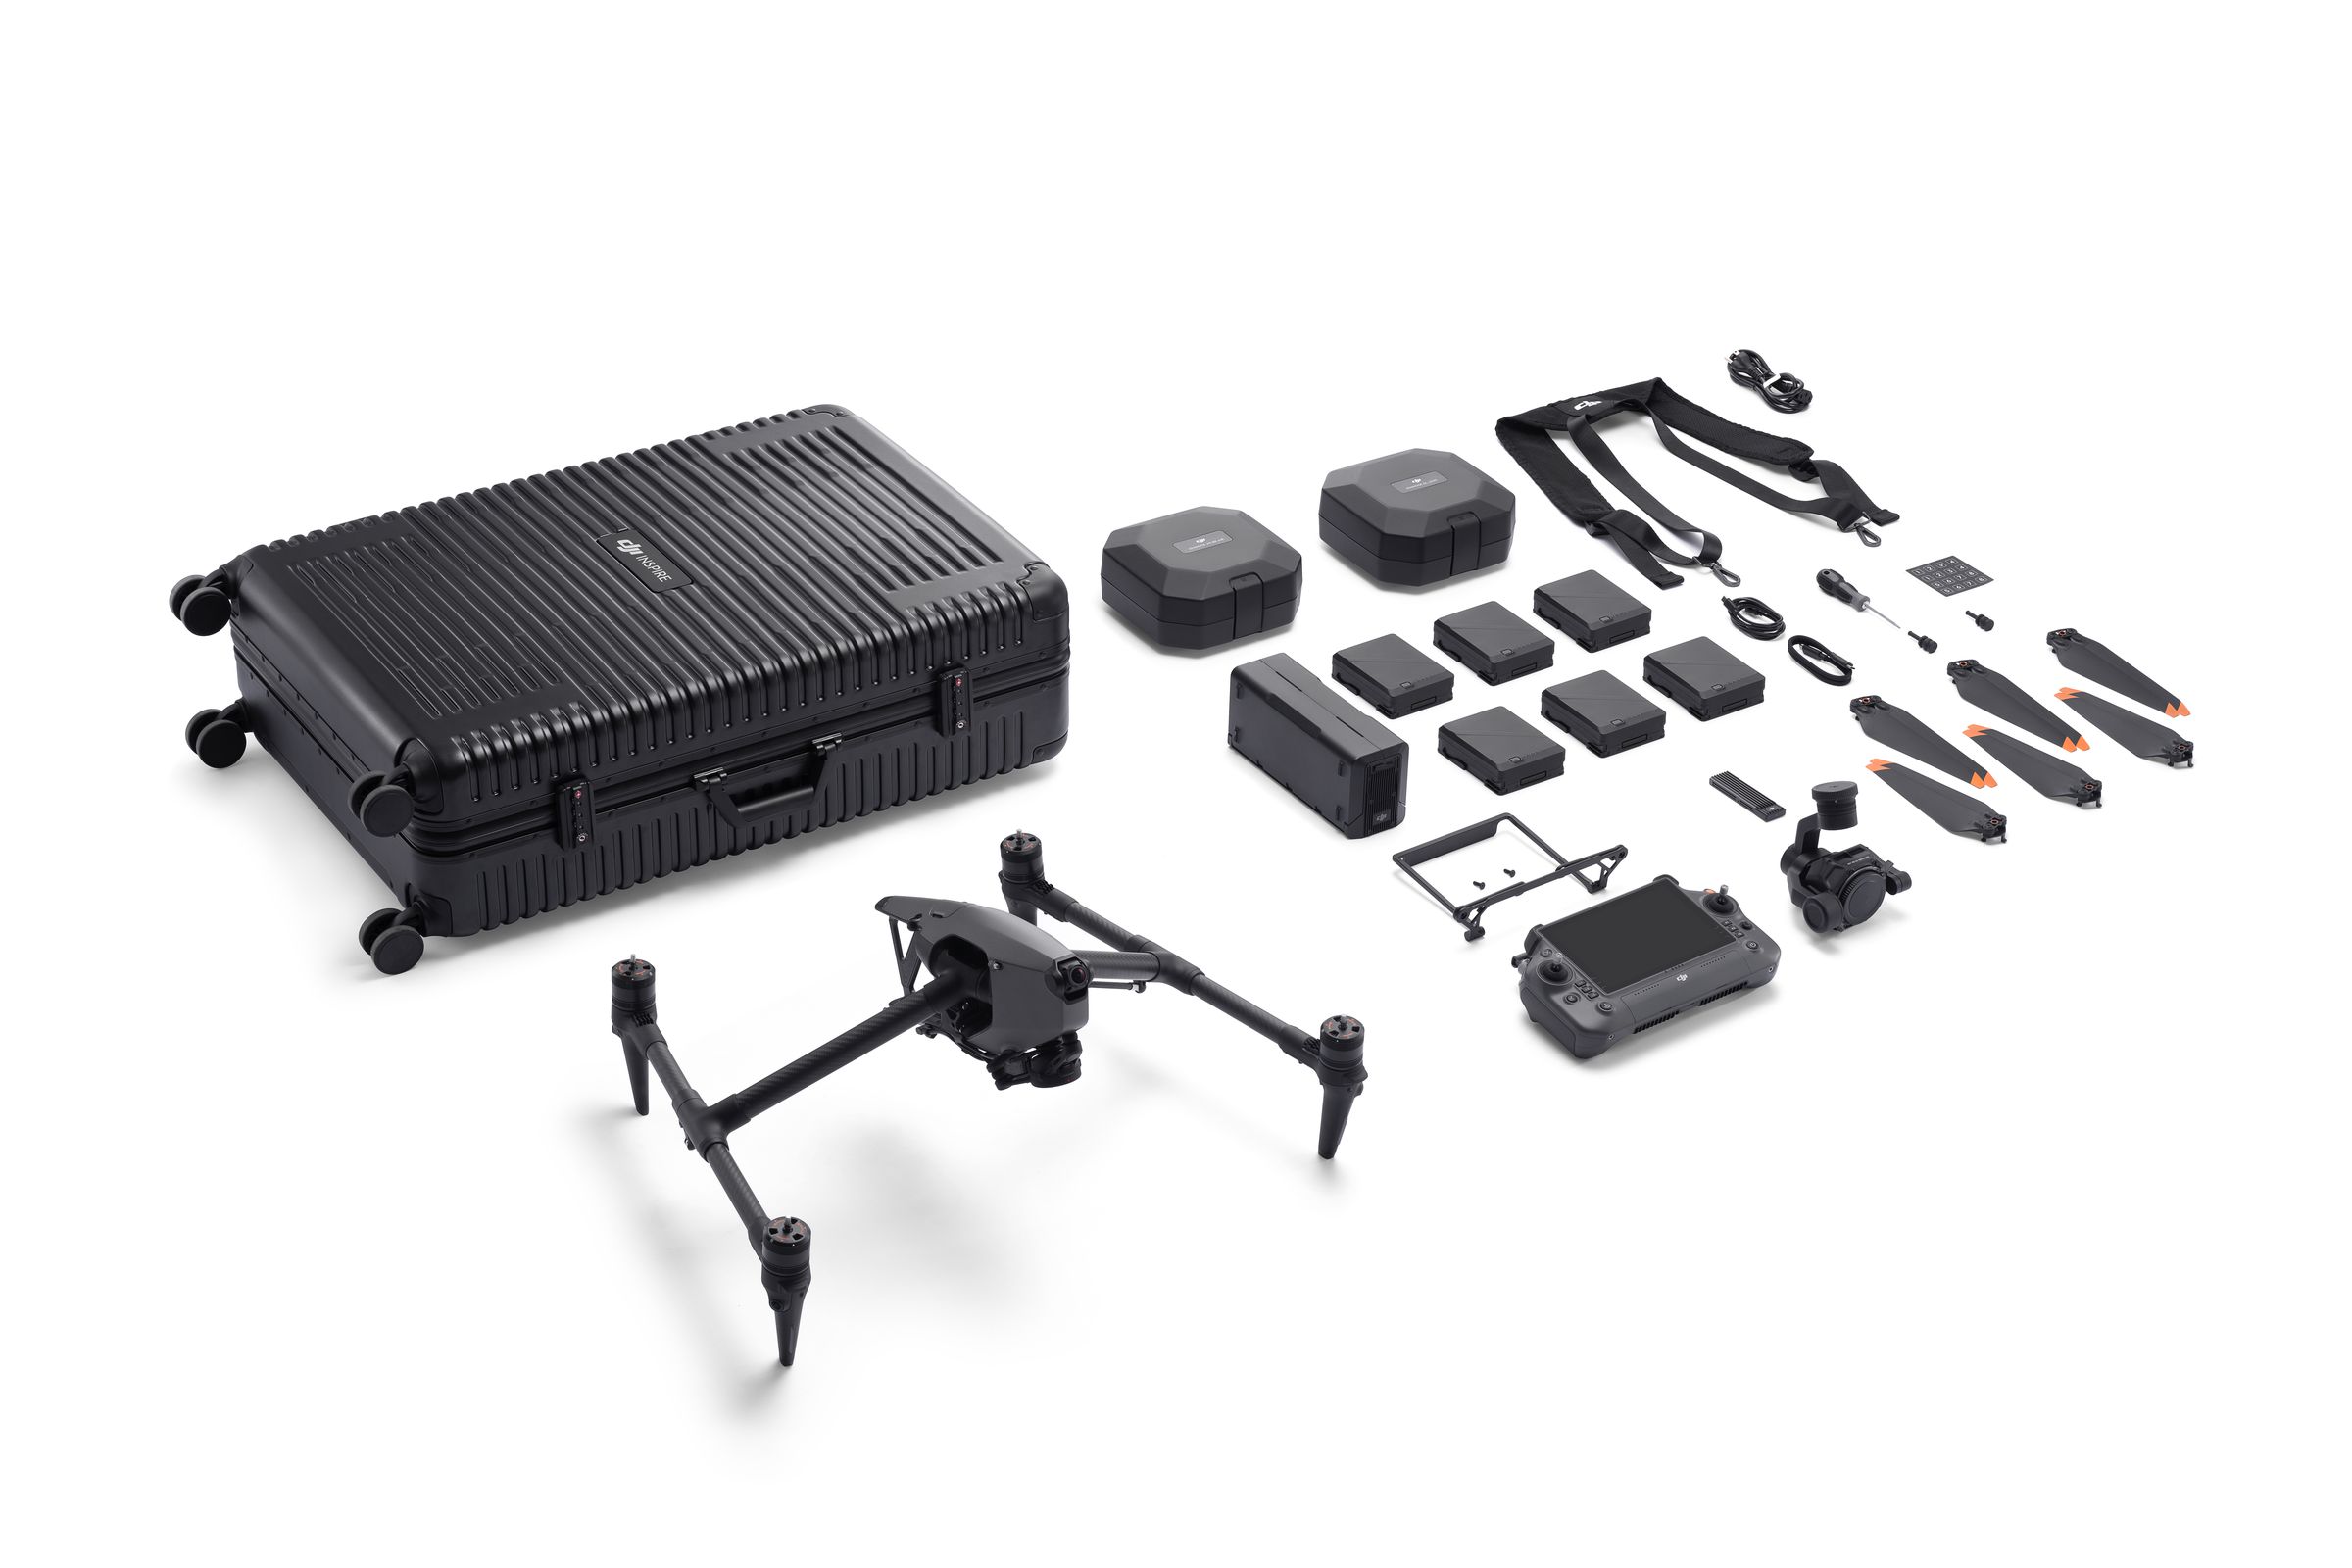 DJI’s $16,499 Inspire 3 combo comes with everything you see here, “and more.”